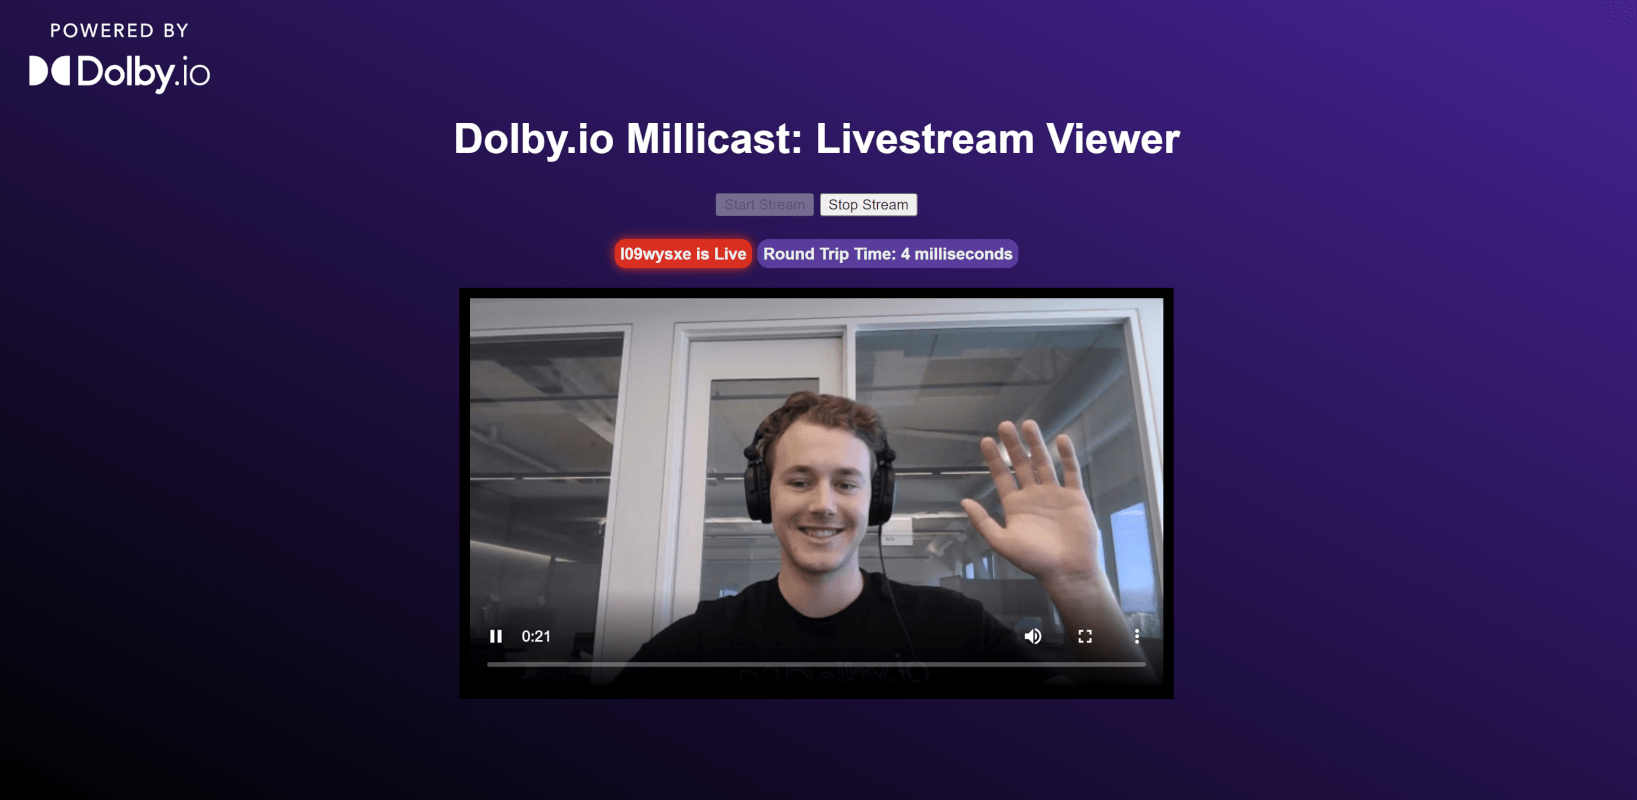 Once users log into the Livestream viewer they connect to a low-latency webRTC stream powered by Dolby.io Millicast. Build a quality ultra low latency livestream platform that can support hundreds of thousands of viewers with just a few lines of JavaScript by leveraging the power of WebRTC and Dolby.io Millicast.